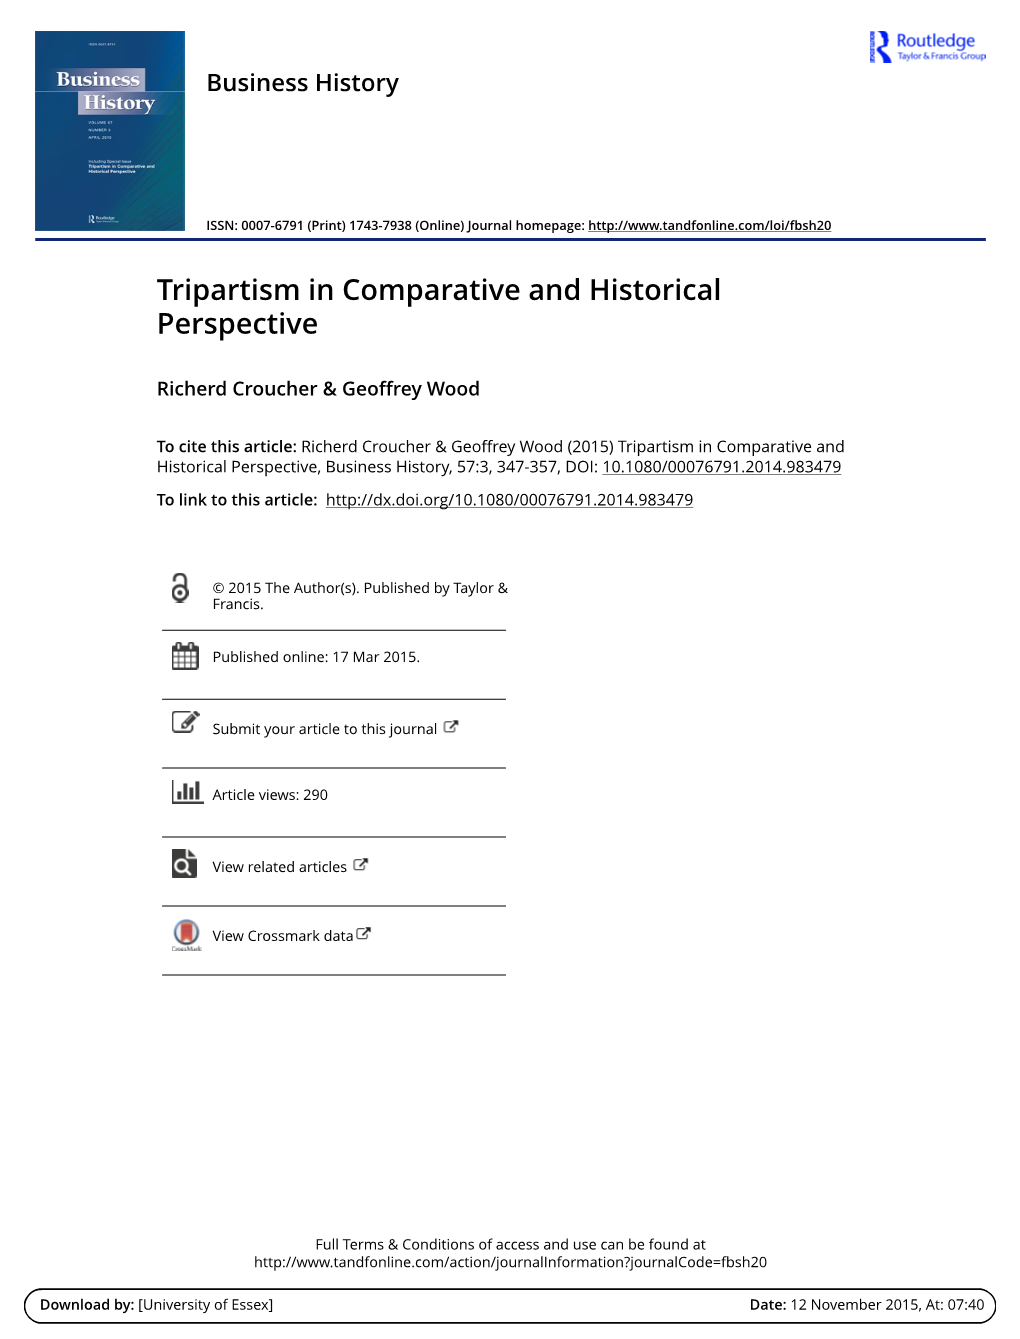 Tripartism in Comparative and Historical Perspective